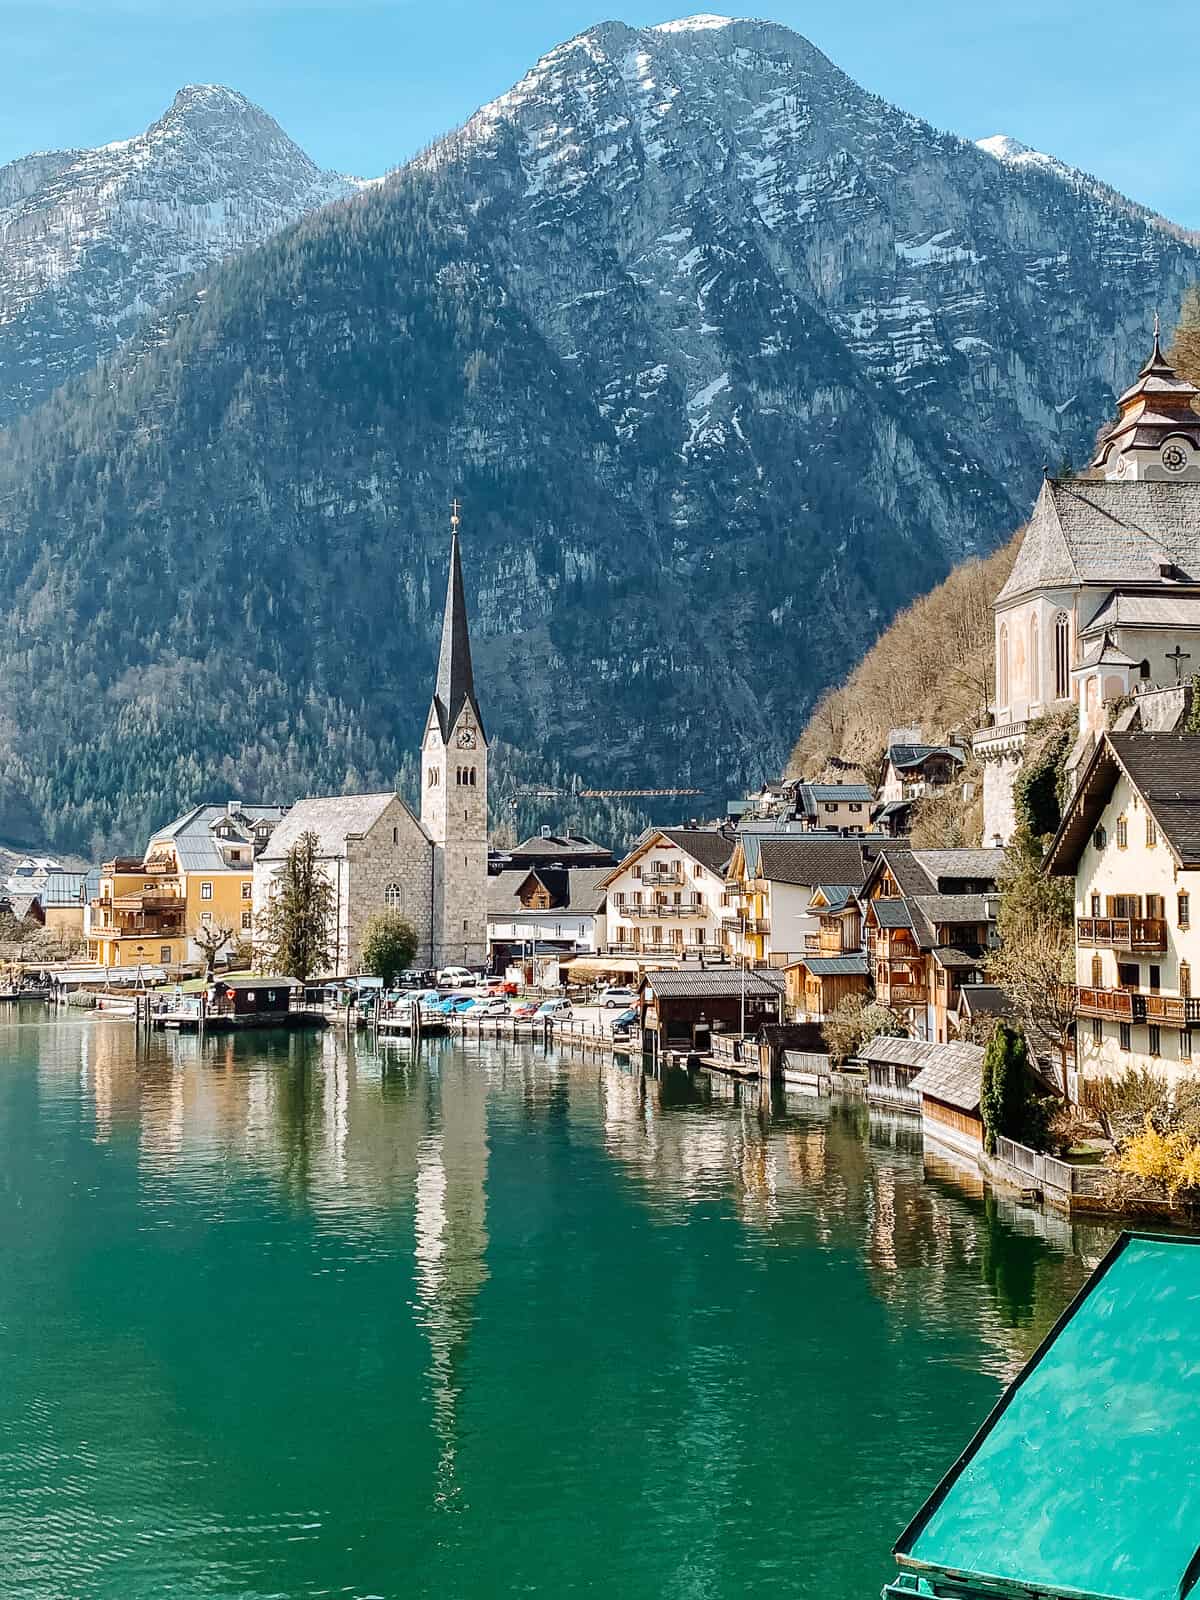 The picturesque village of Hallstatt in Austria, with its beautiful church spire and traditional buildings set against the stunning backdrop of alpine mountains and the reflective waters of Hallstatt Lake.